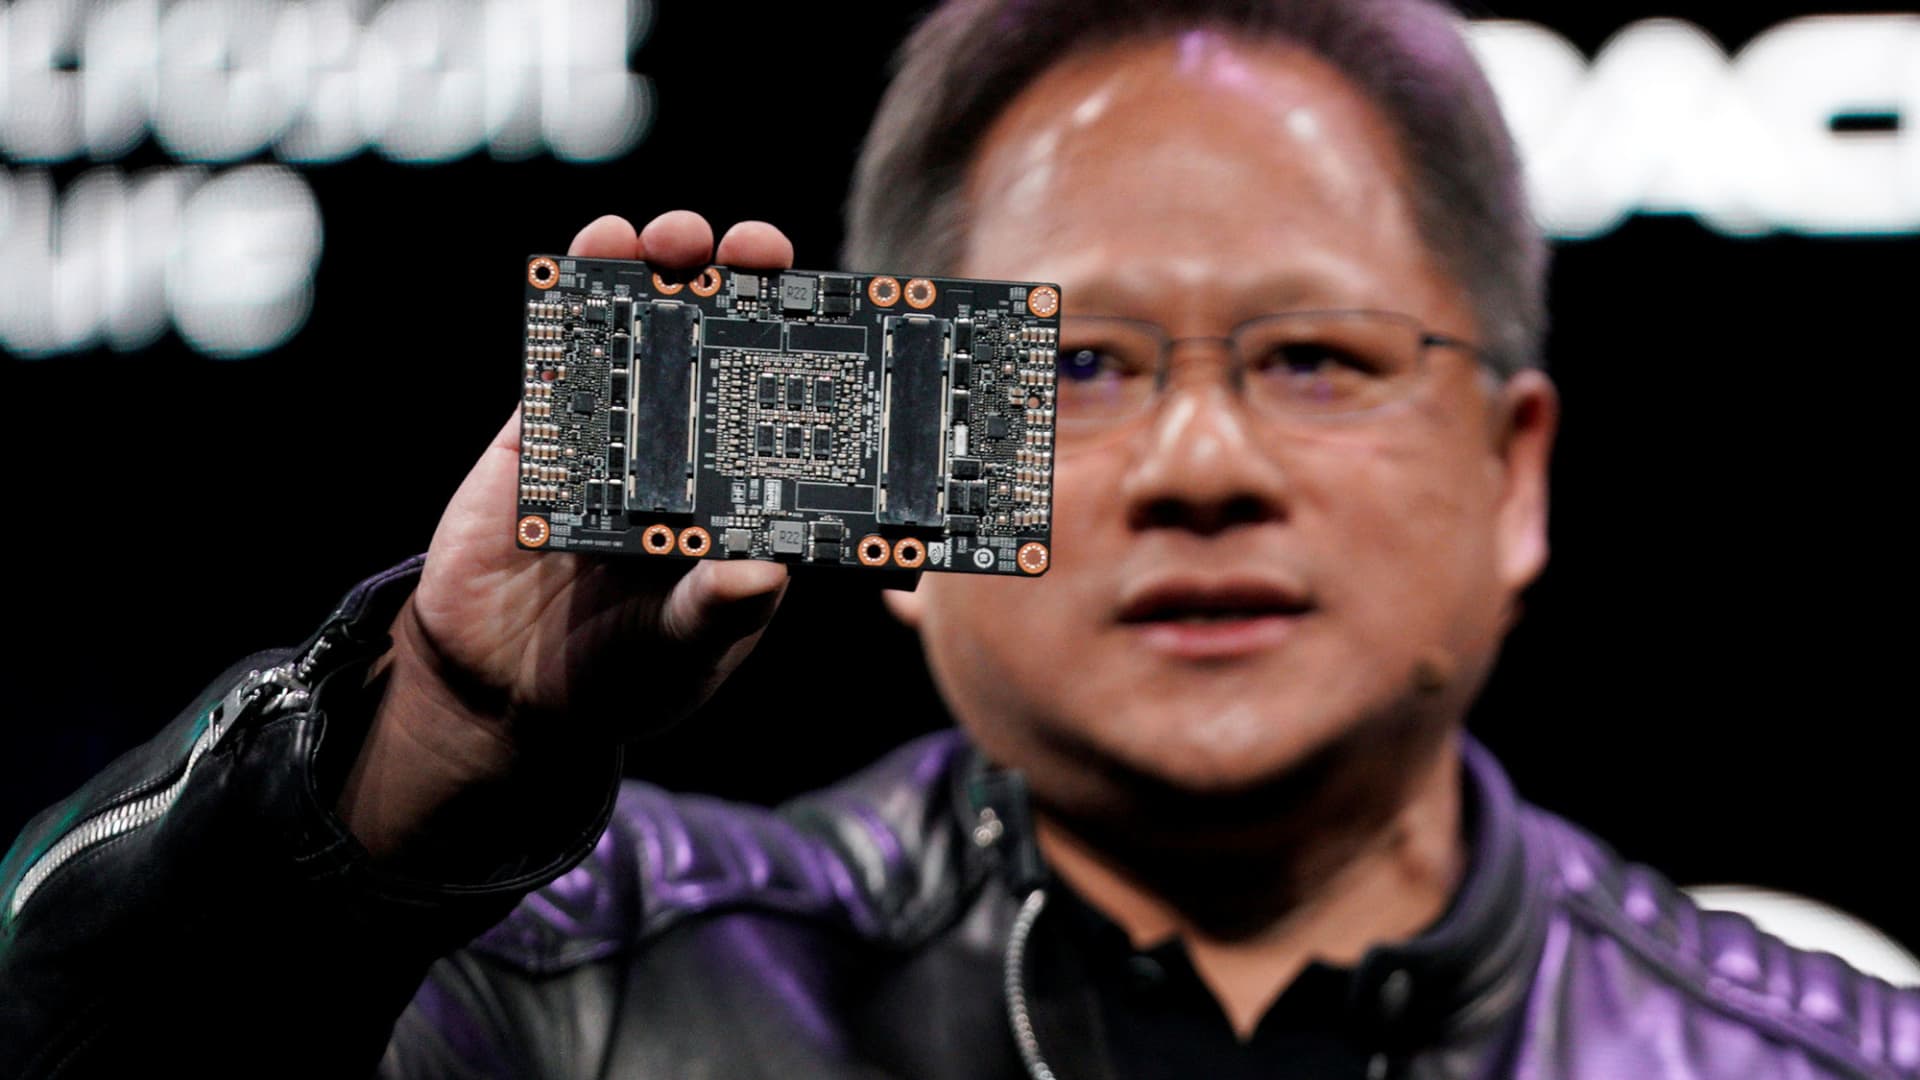 Nvidia’s blowout earnings lift AMD while other chipmakers like Intel fall